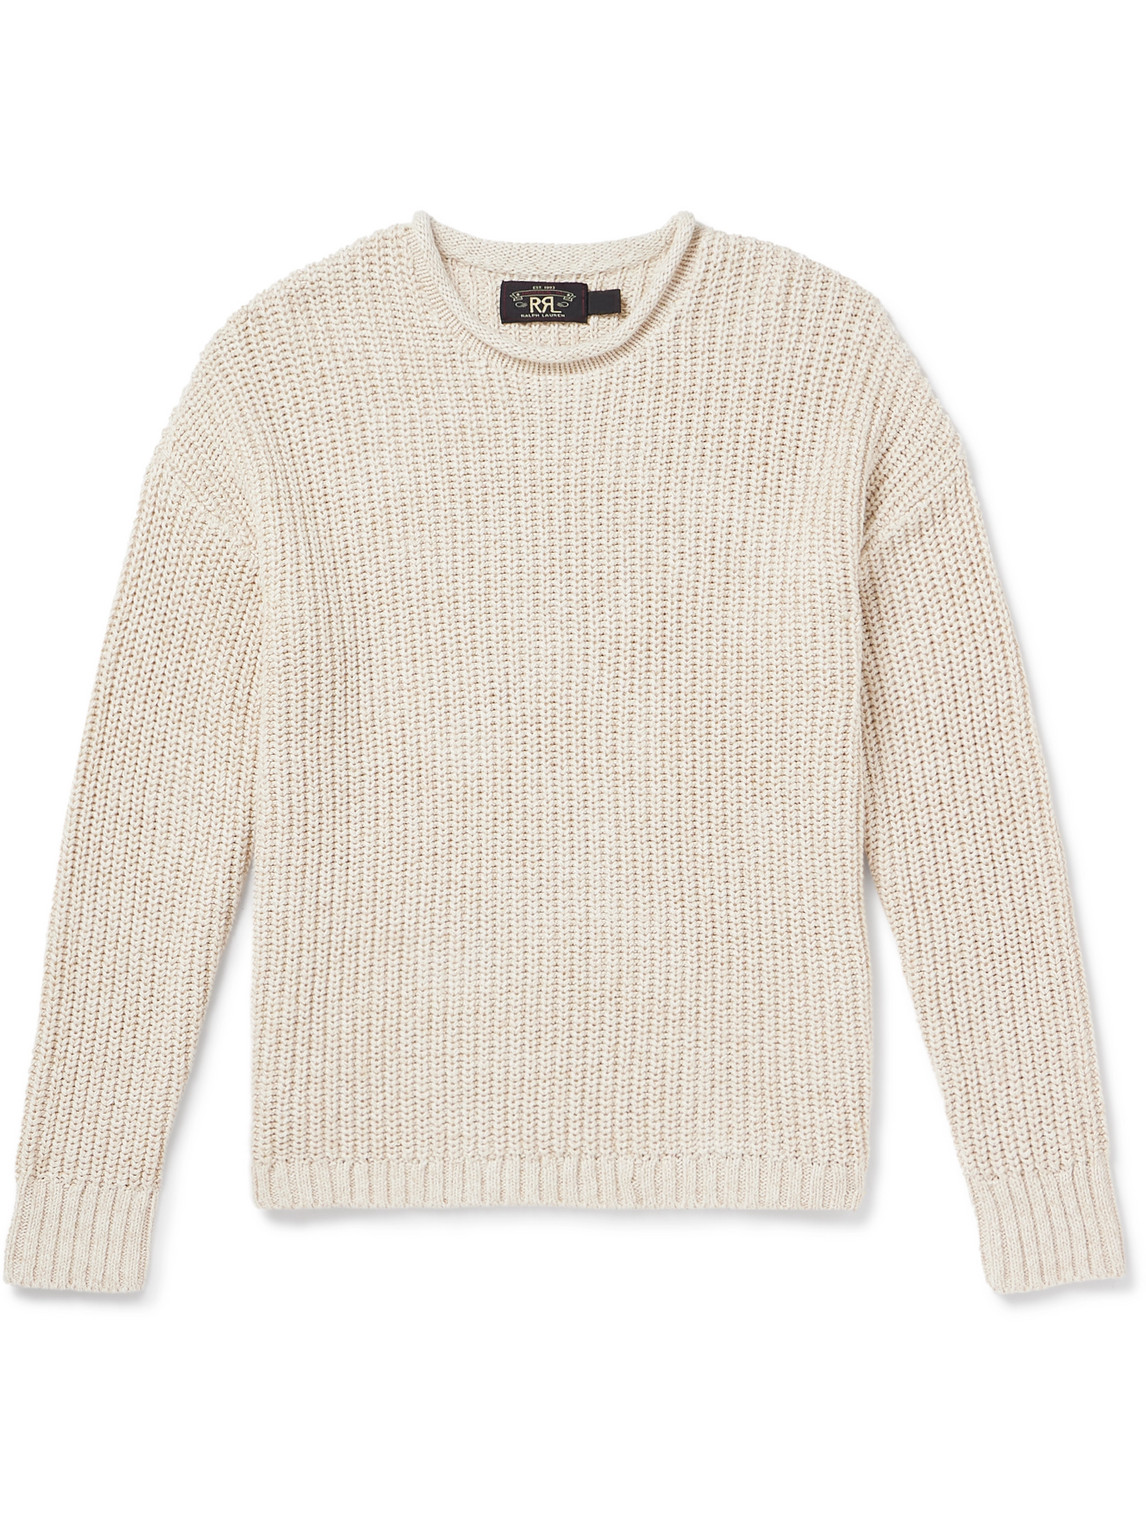 Ribbed Linen and Cotton-Blend Sweater